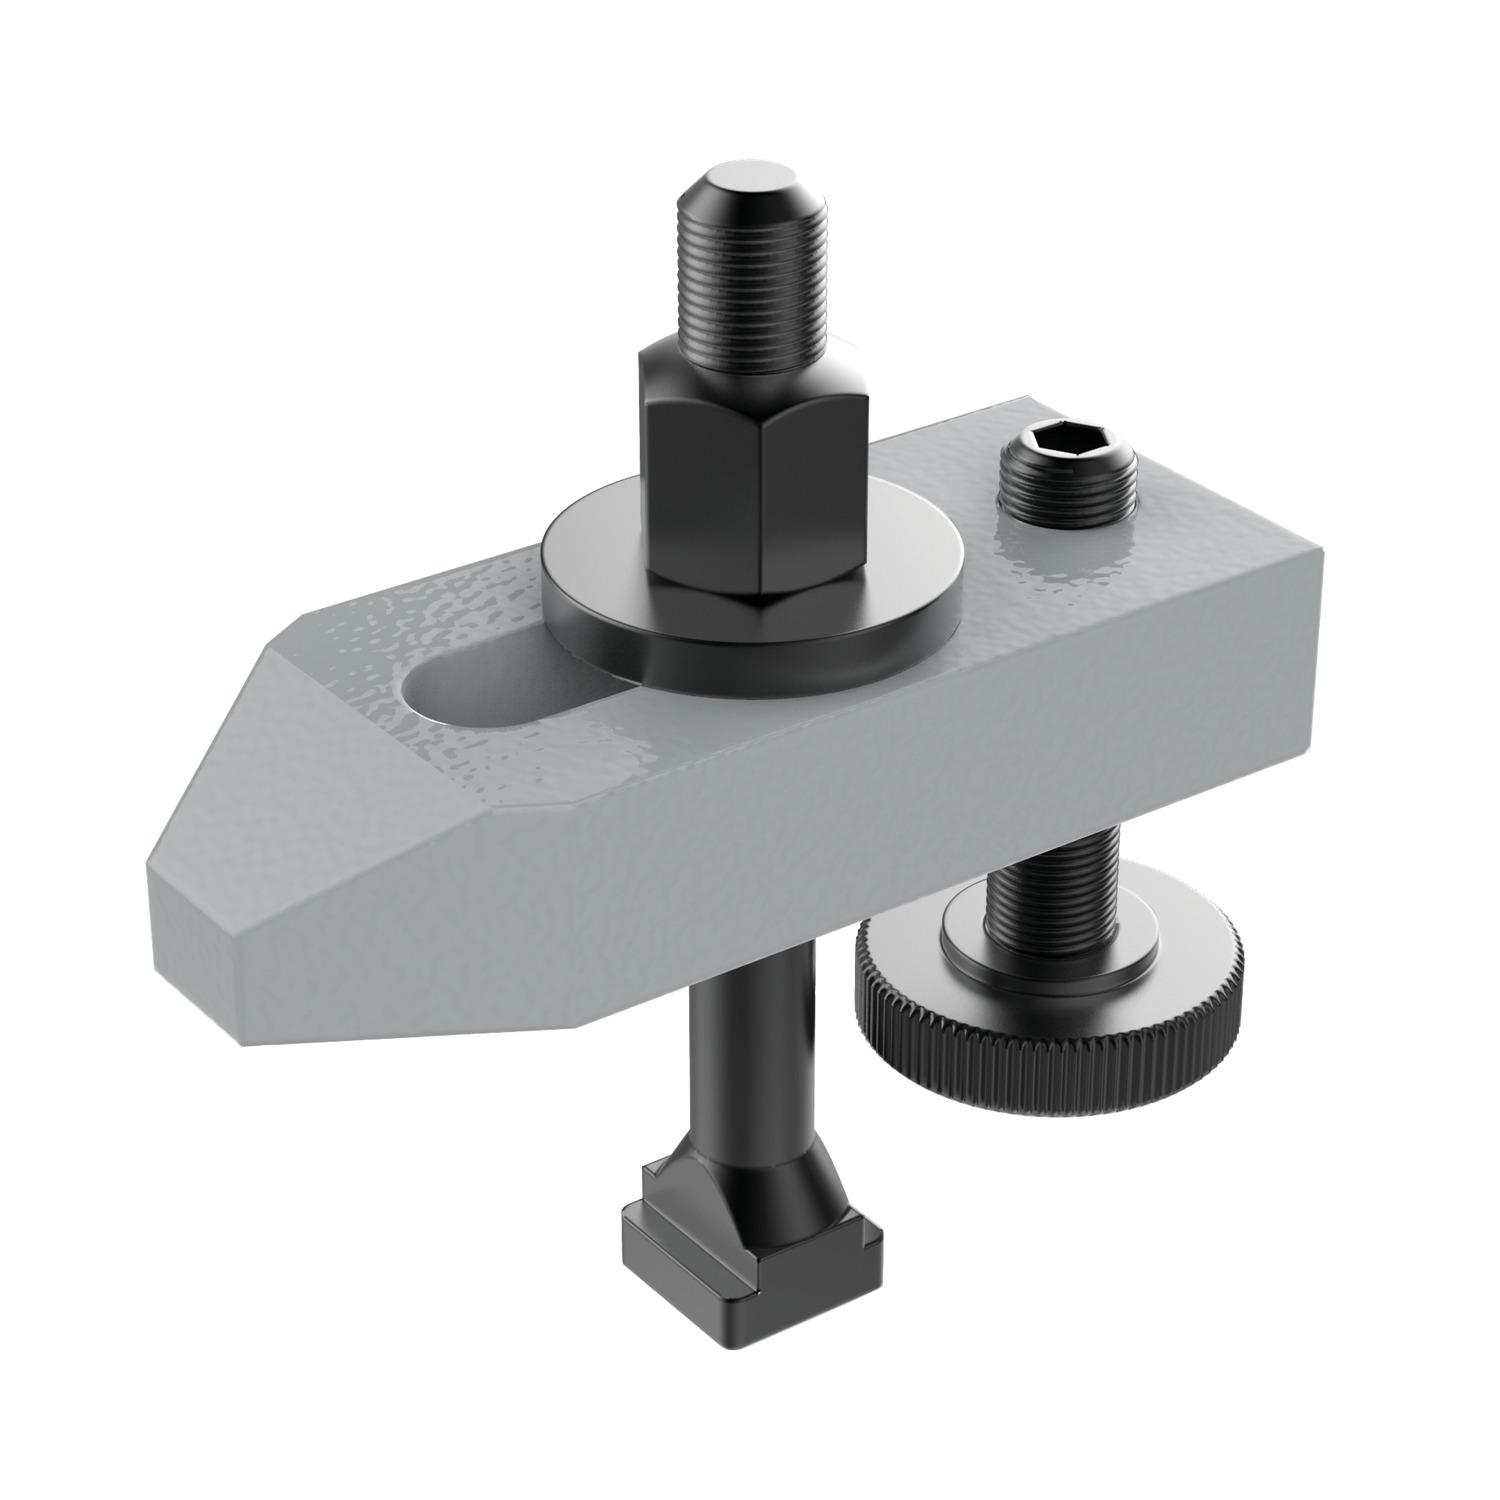 Adjustable Plain Clamps The Adjustable plain clamps come supplied with or without t-slot bolt and supplied with a height adjusting screw.